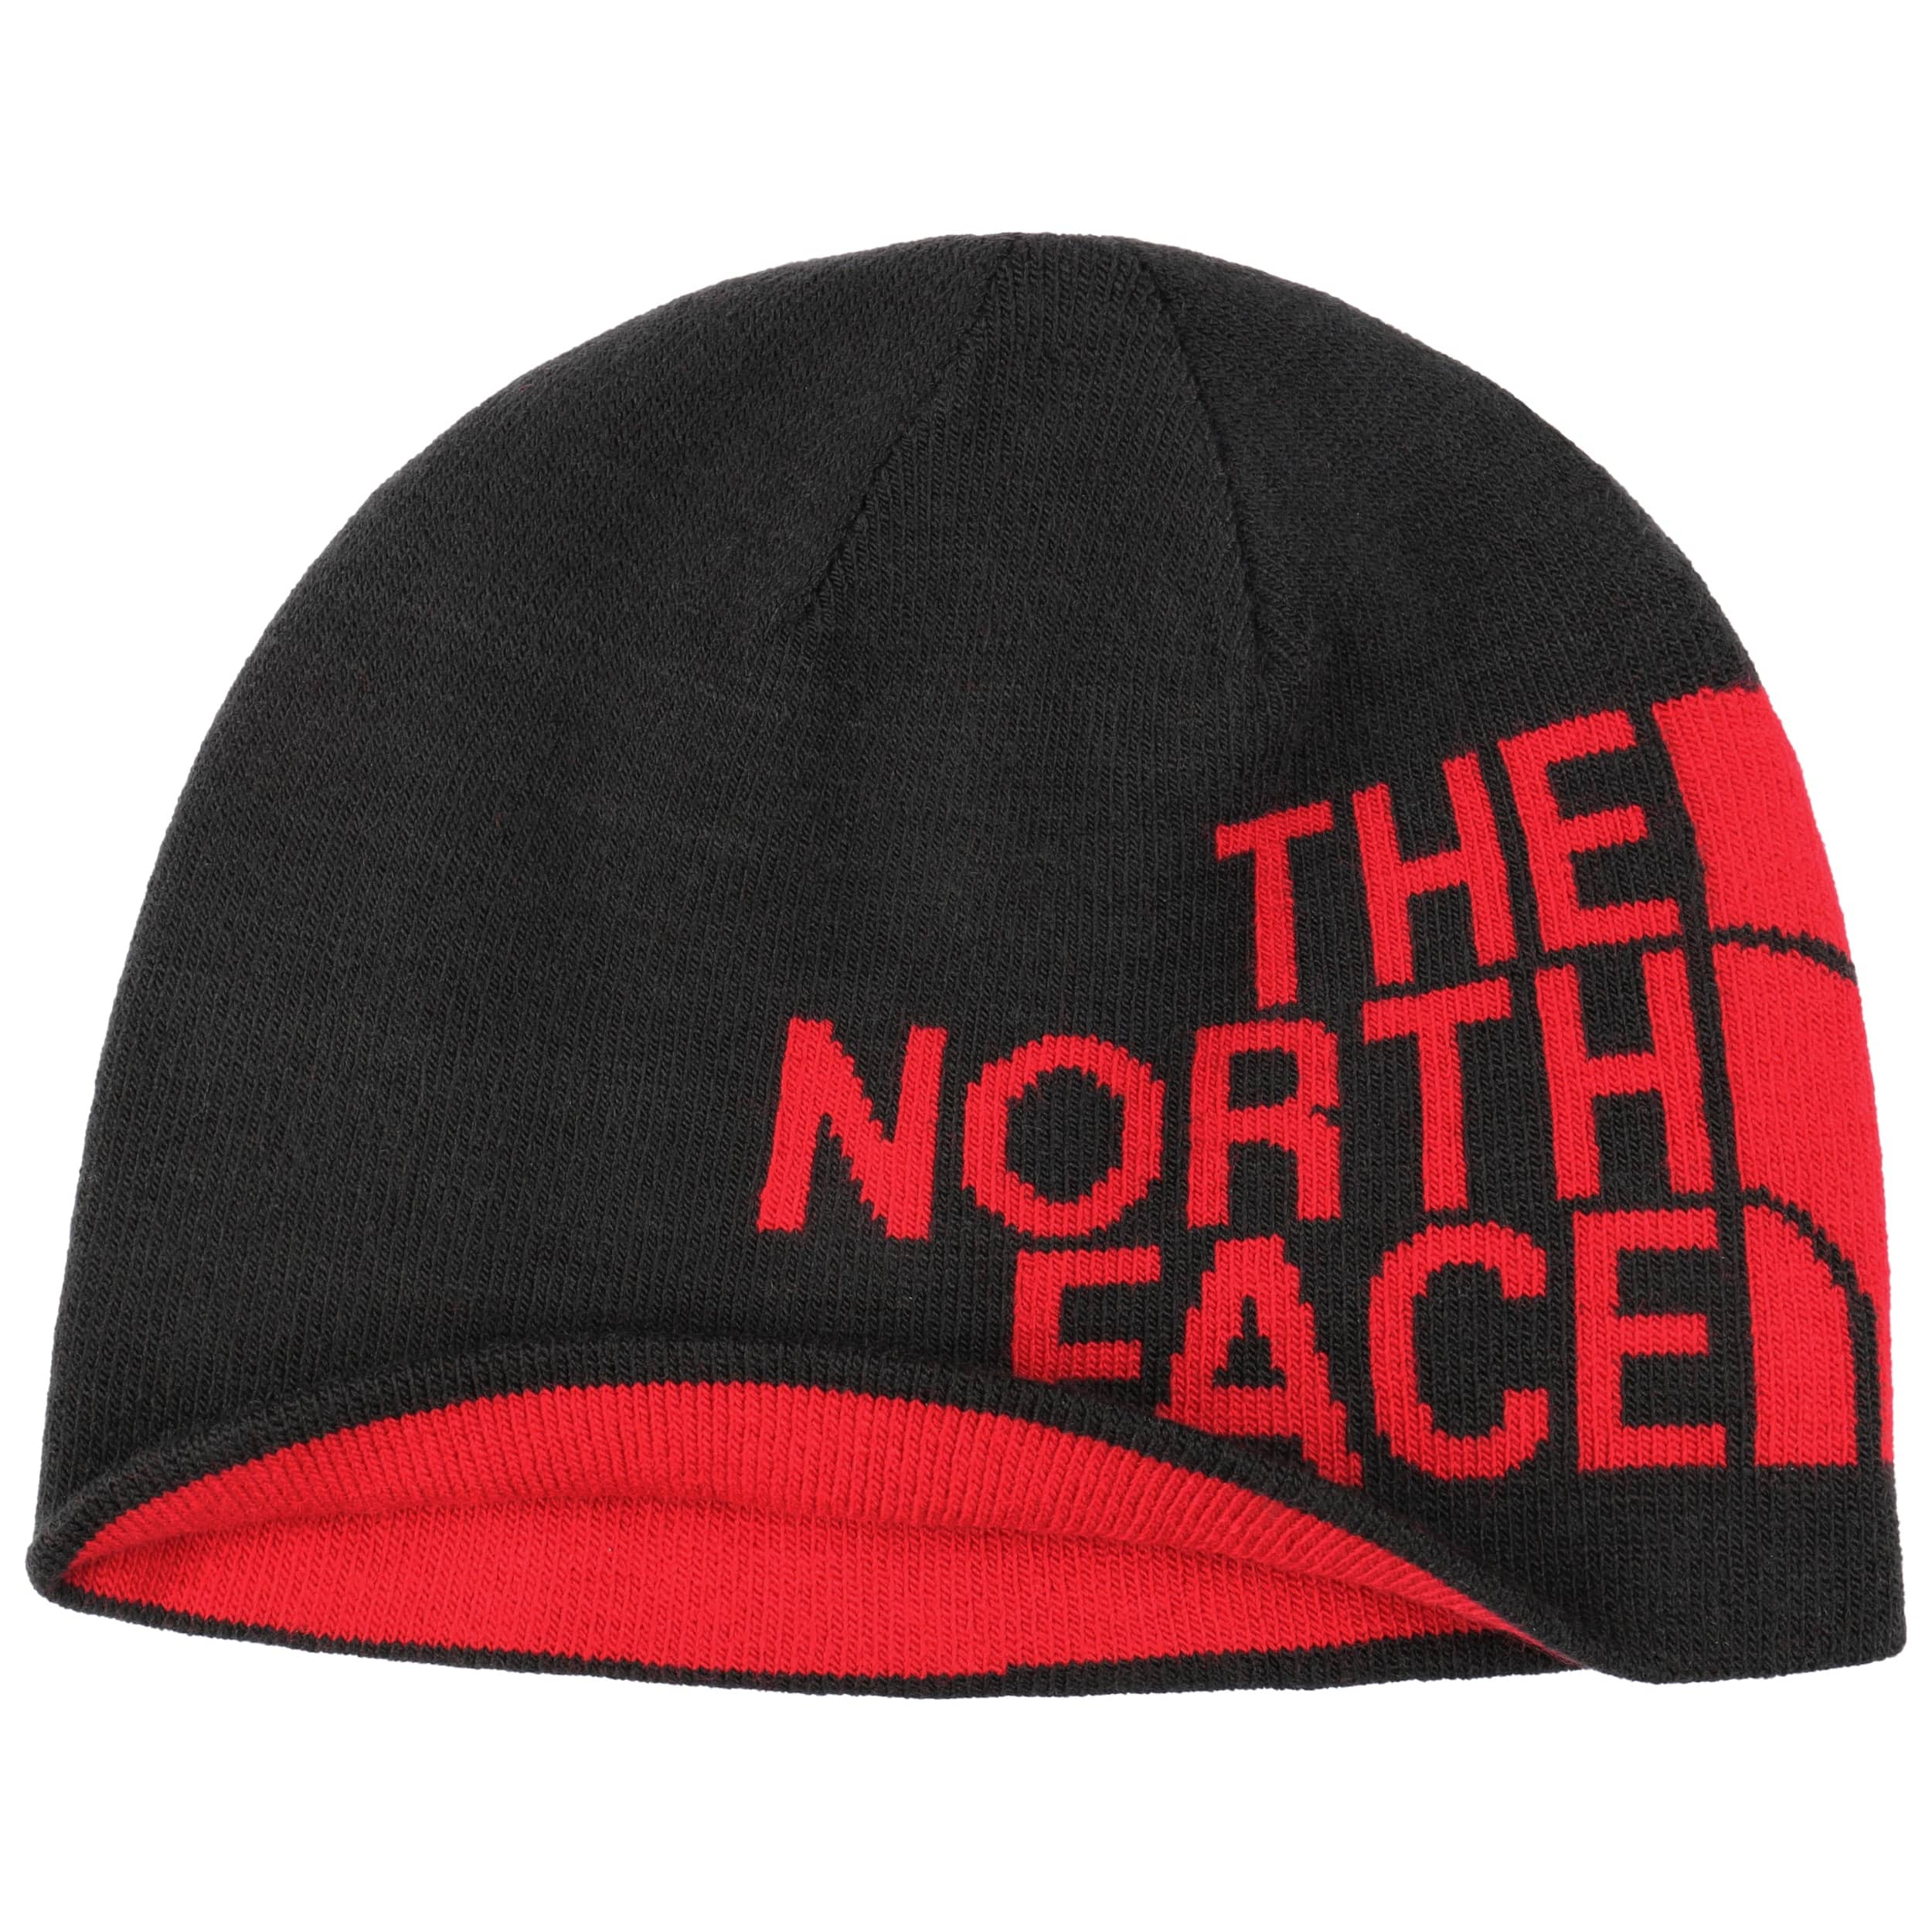 red north face beanie